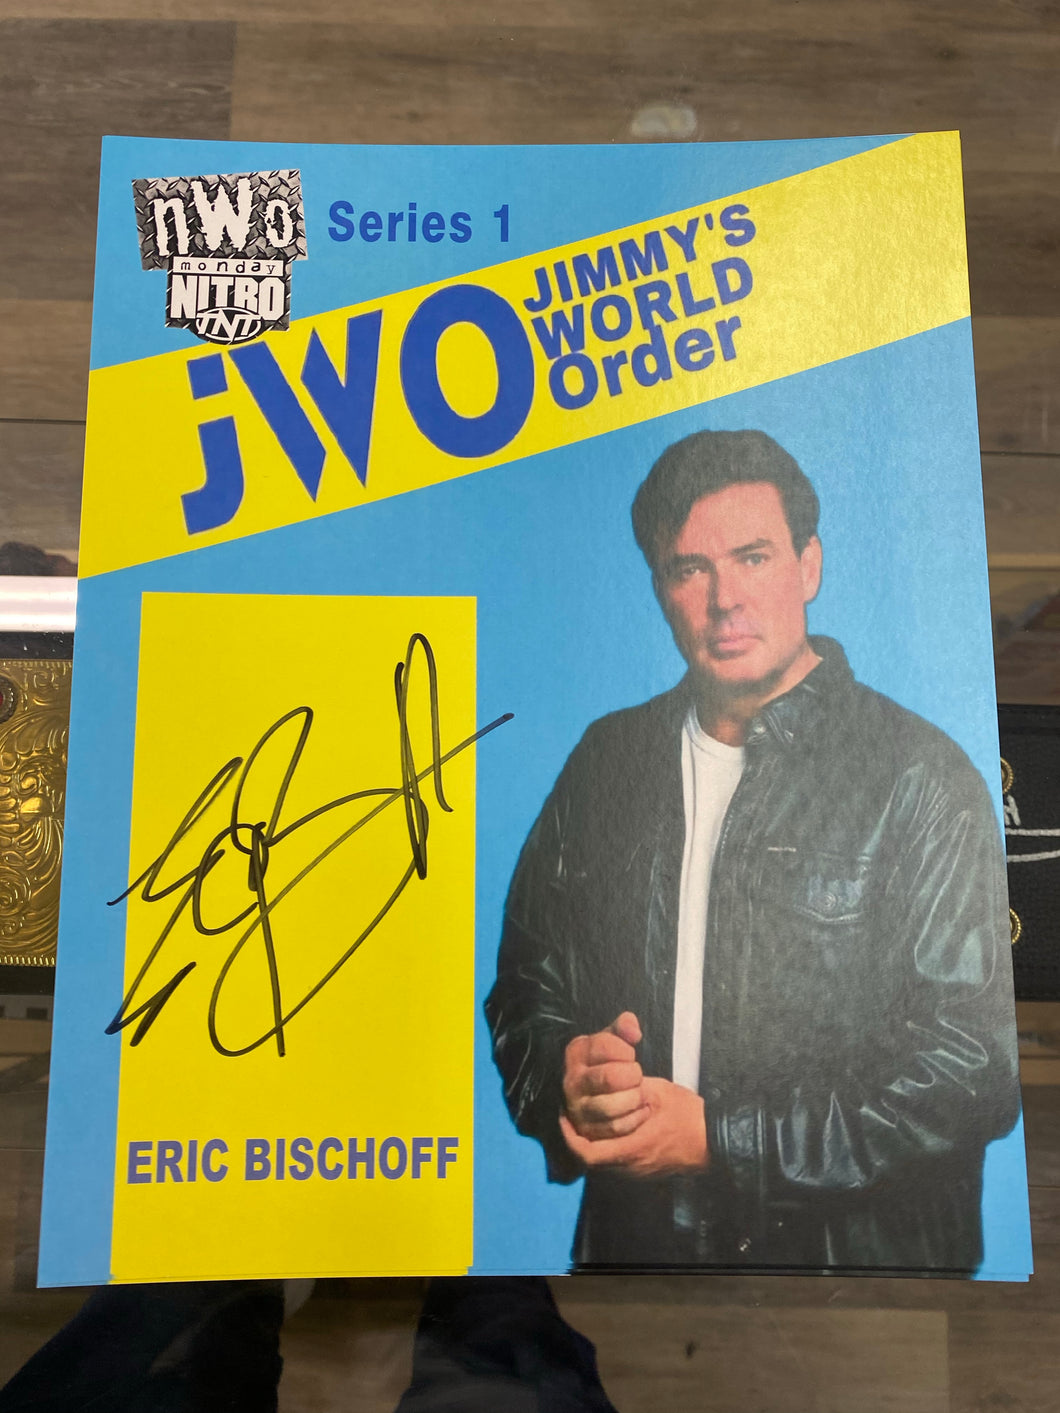 Eric Bischoff Autographed 8x10 with Toploader